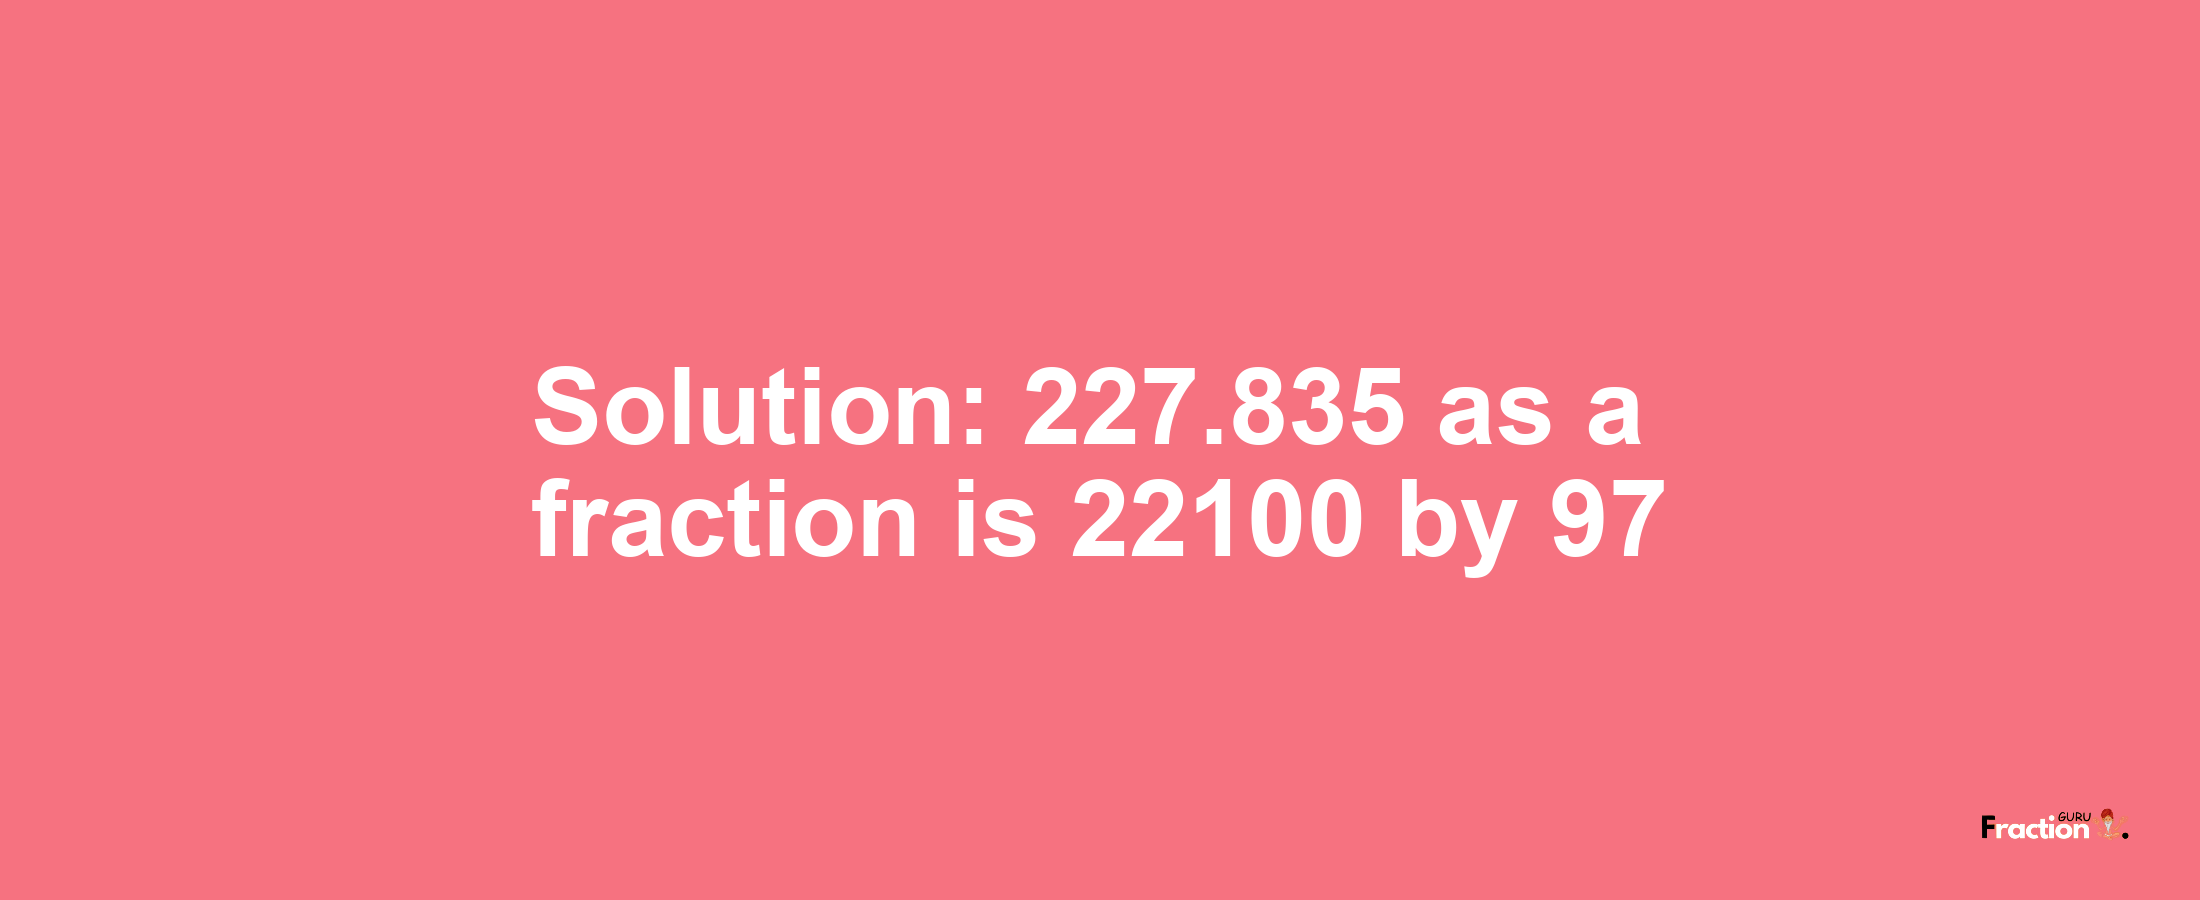 Solution:227.835 as a fraction is 22100/97